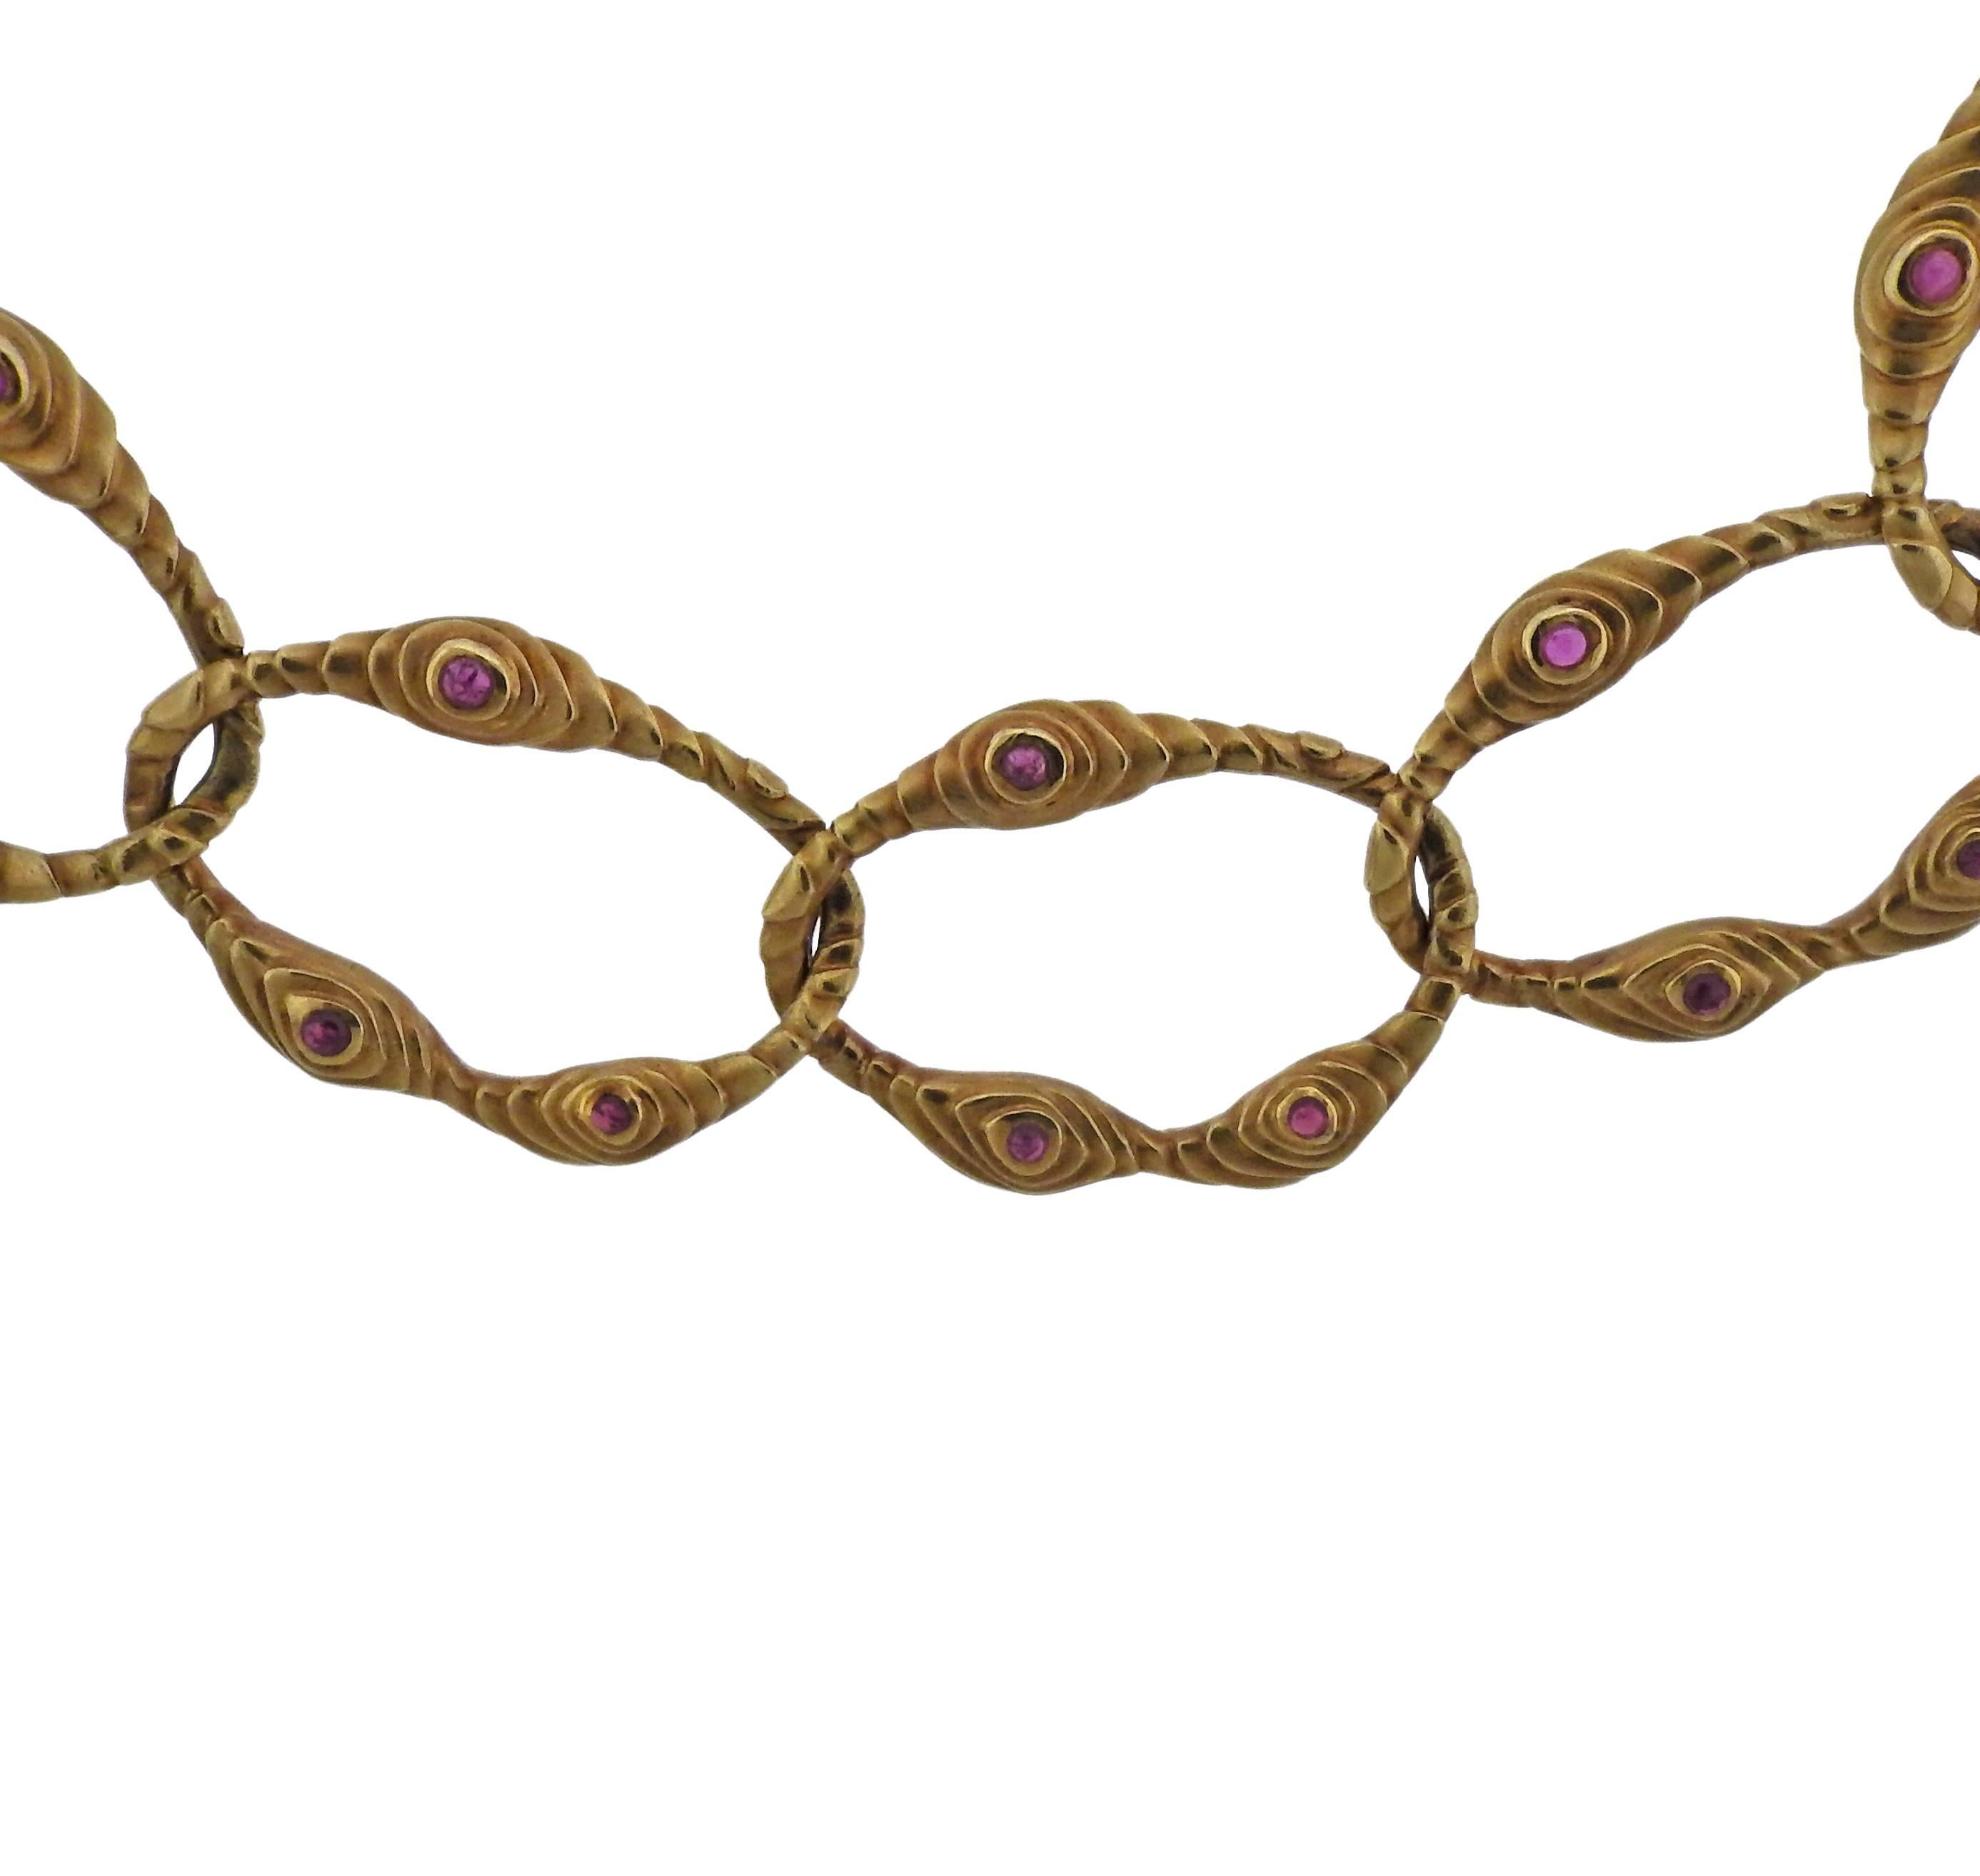 An 18k yellow gold link necklace by Angela Cummings, crafted in 1980s, decorated with ruby cabochons. Necklace is 17